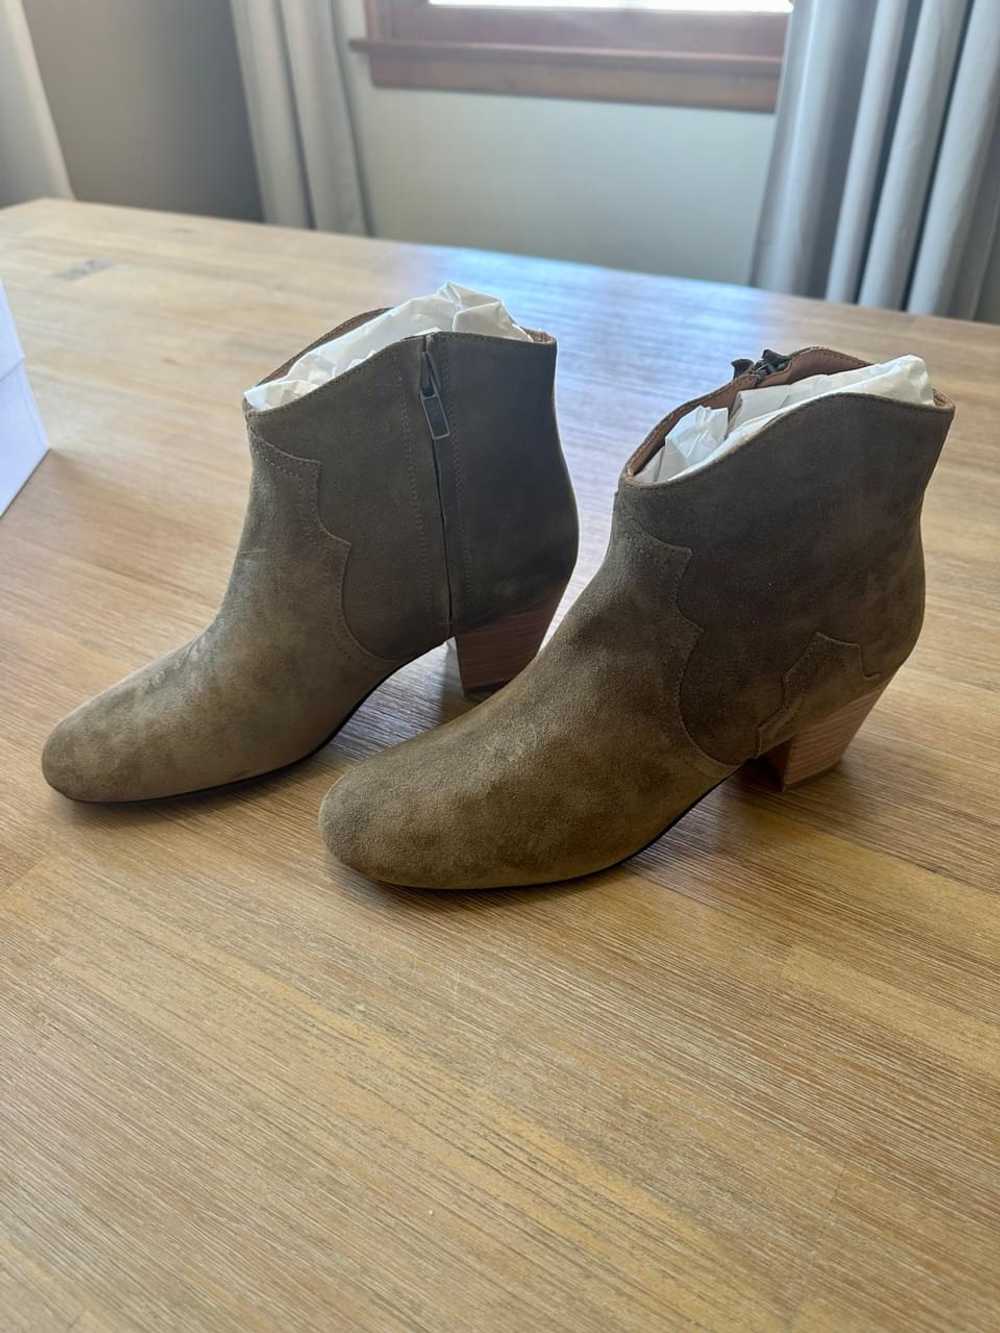 Isabel Marant Dicker Boots (8.5) - image 1